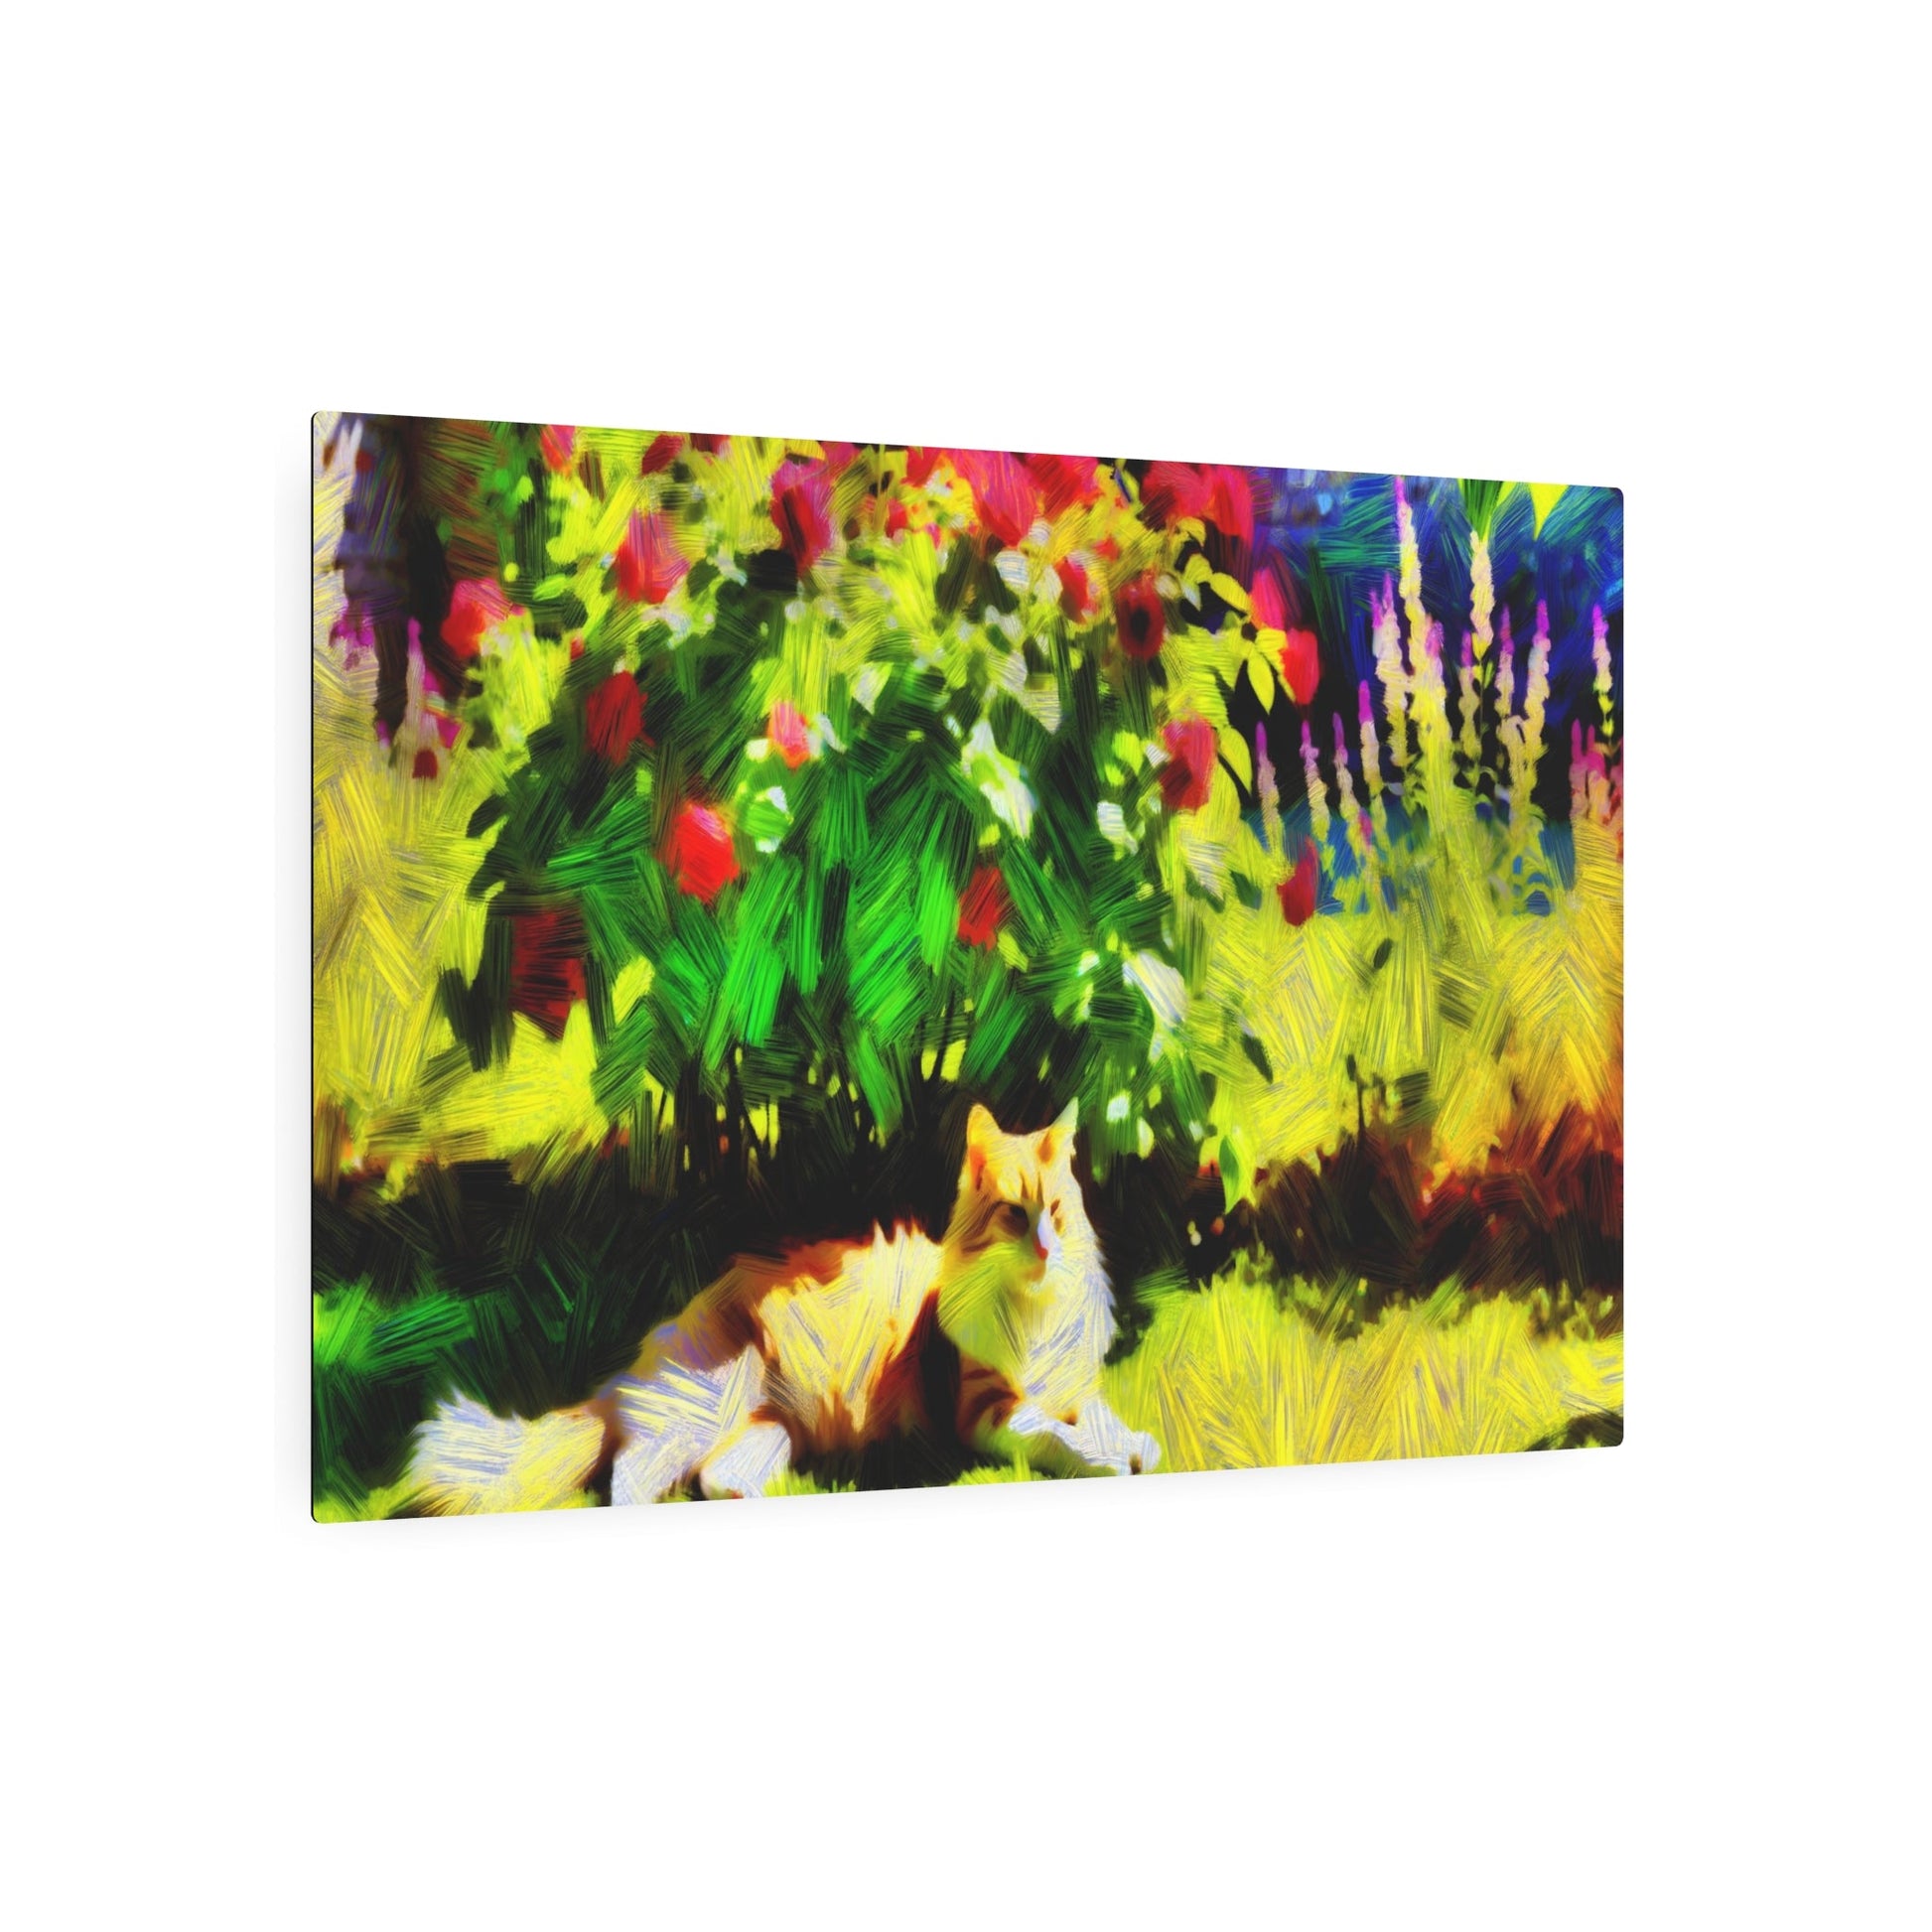 Metal Poster Art | "Impressionist Style Western Art - Sunlit Garden Scene with Cat amid Blooming Flowers" - Metal Poster Art 36″ x 24″ (Horizontal) 0.12''